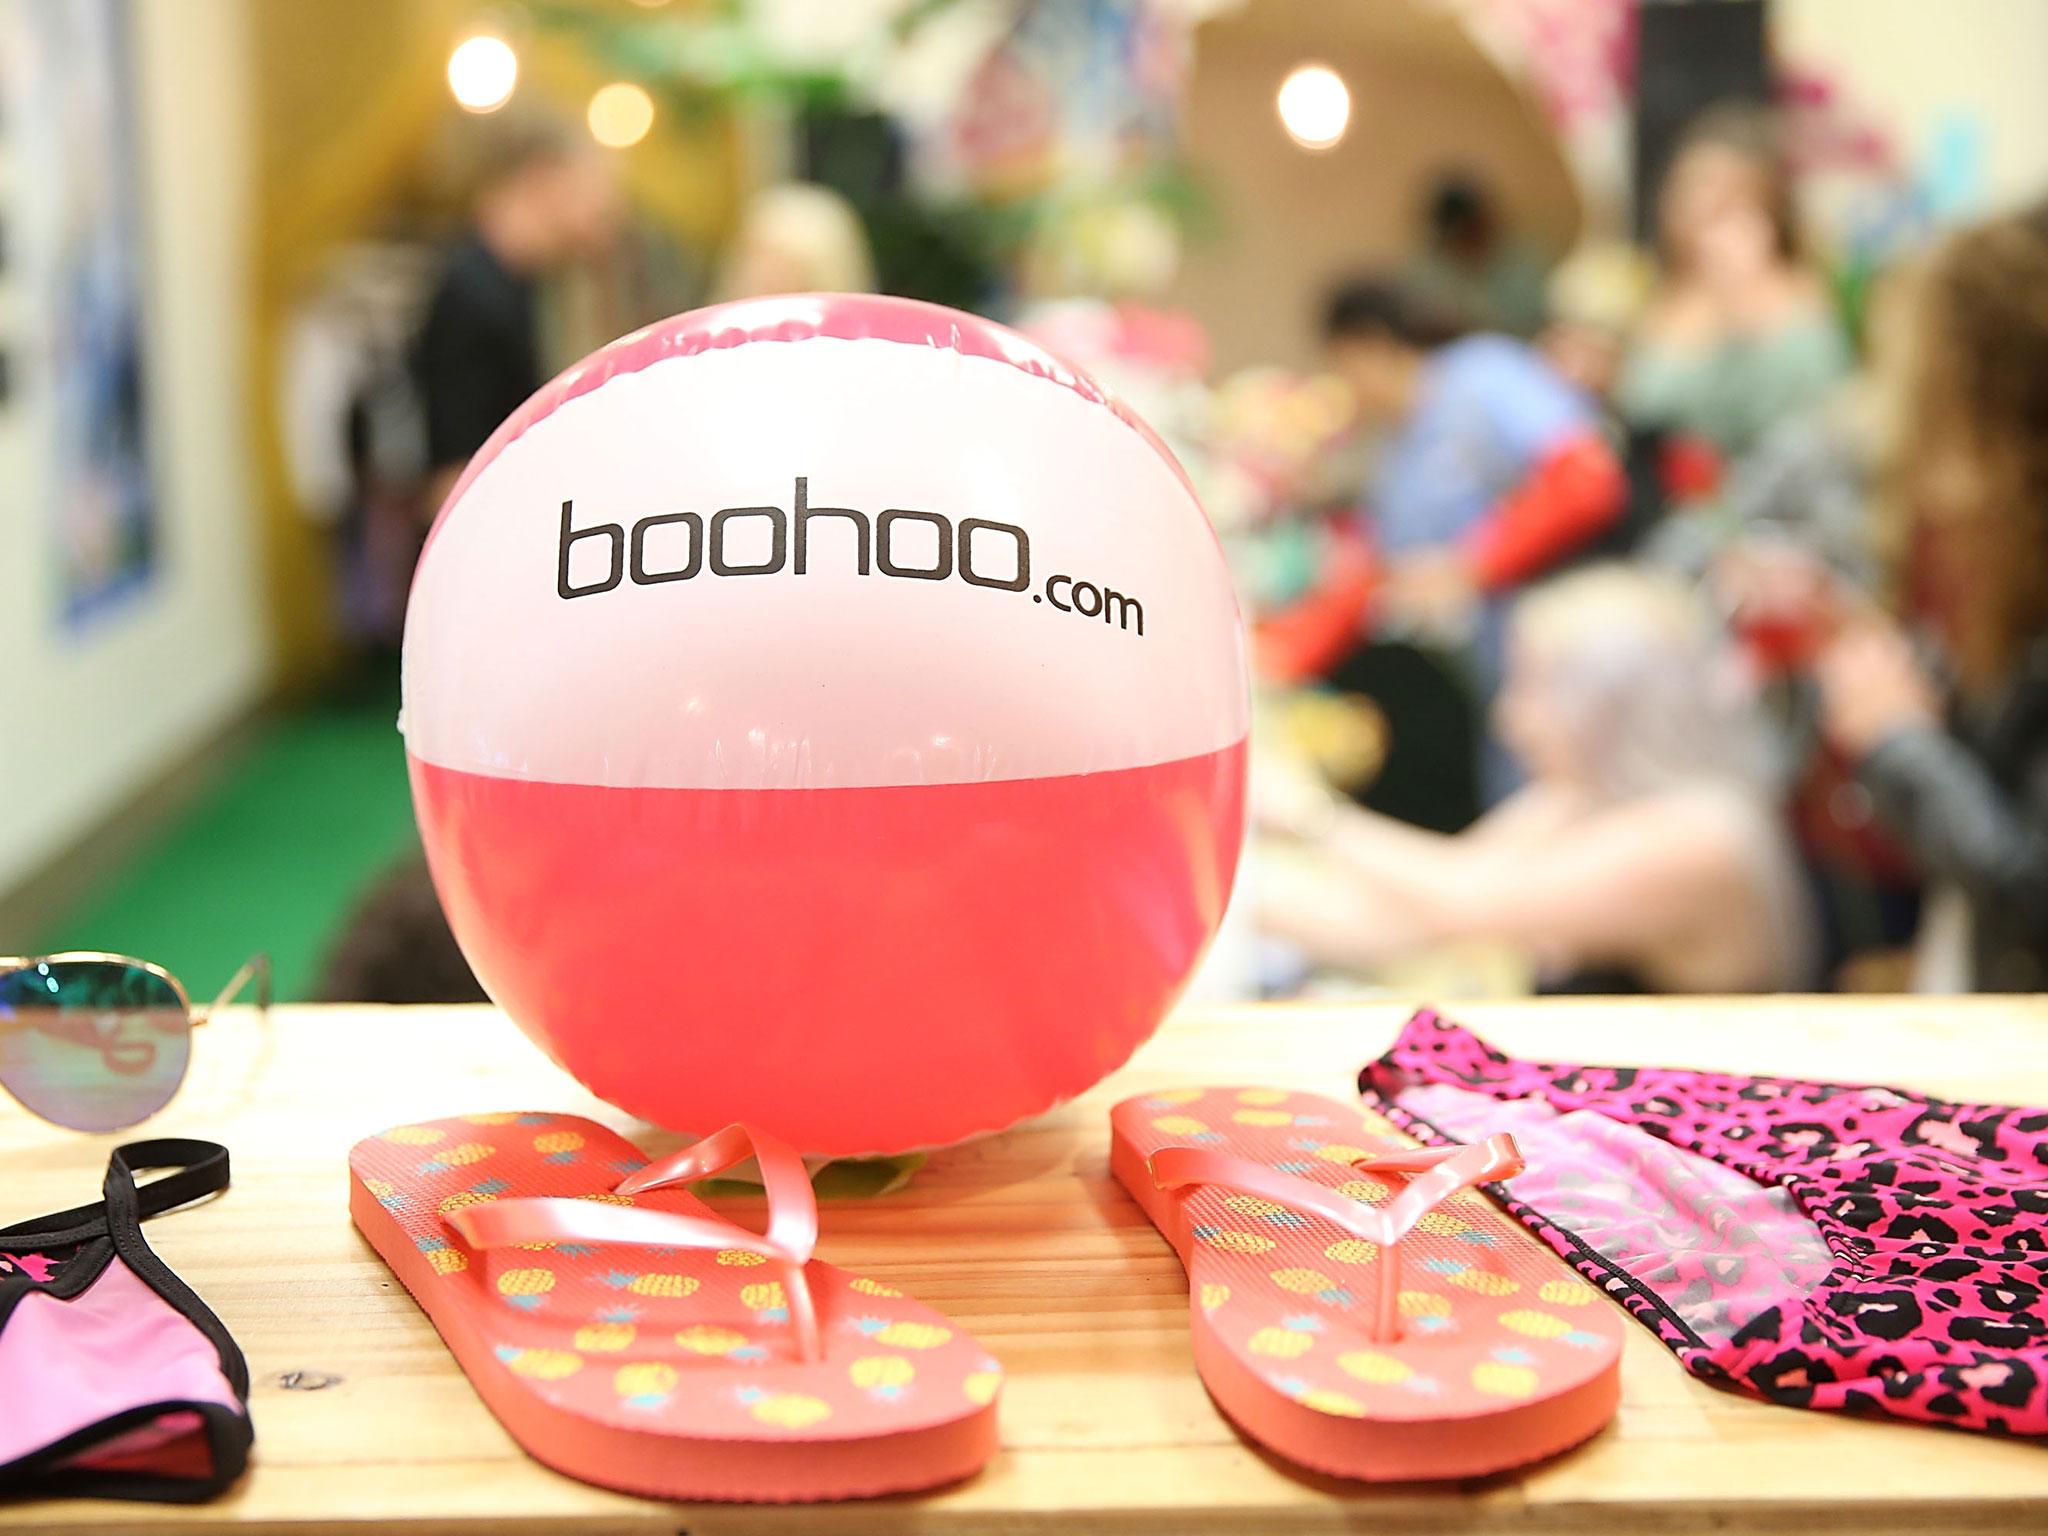 Boohoo has been integrating new brands into the group